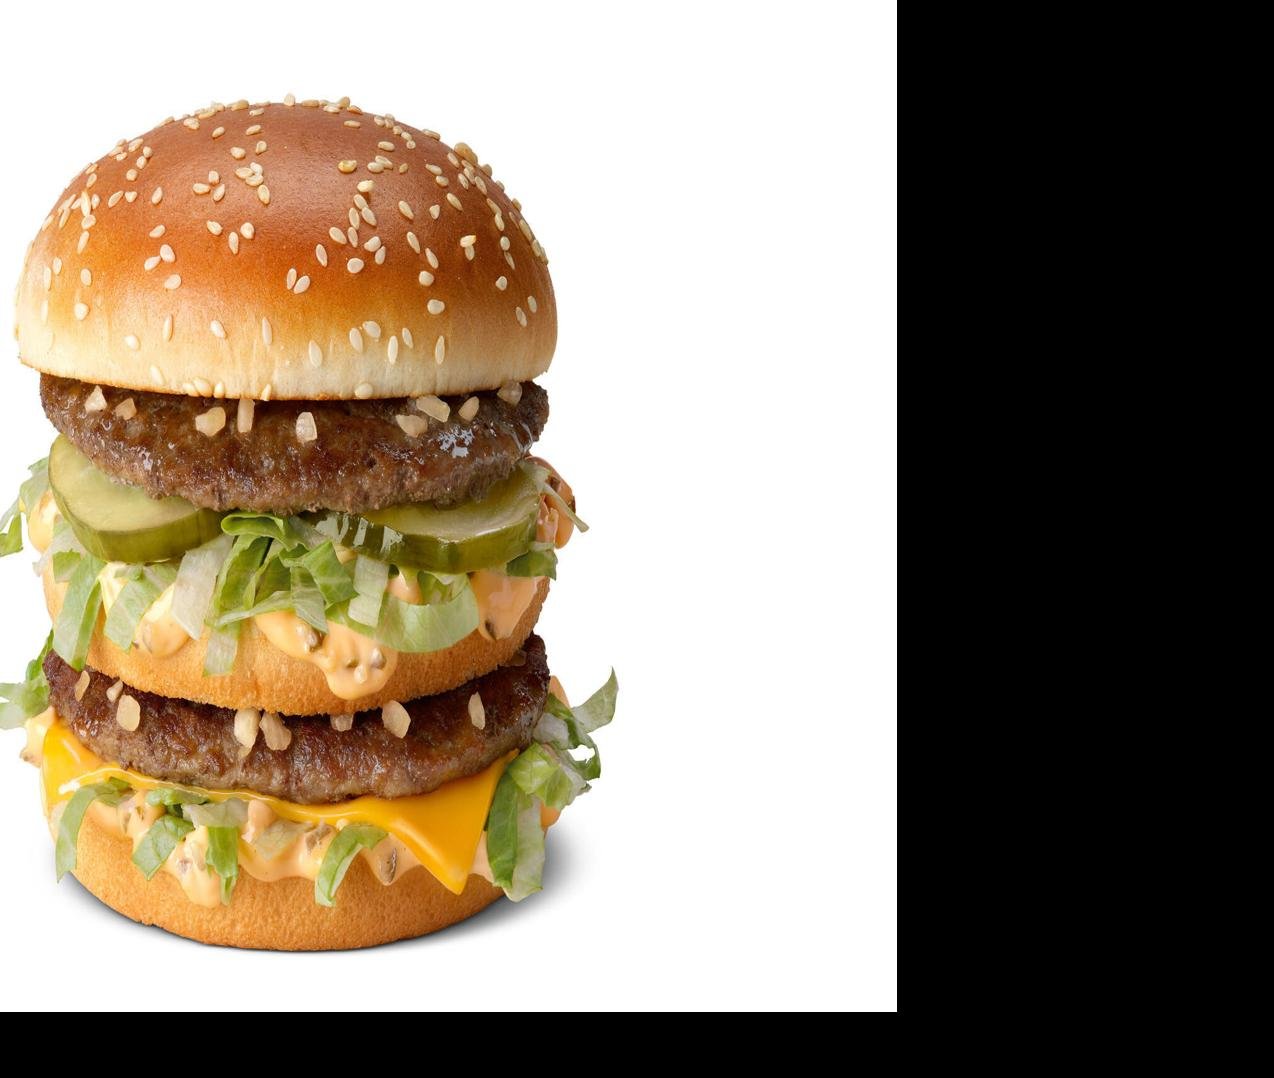 McDonald's bringing back Double Big Mac for a limited time